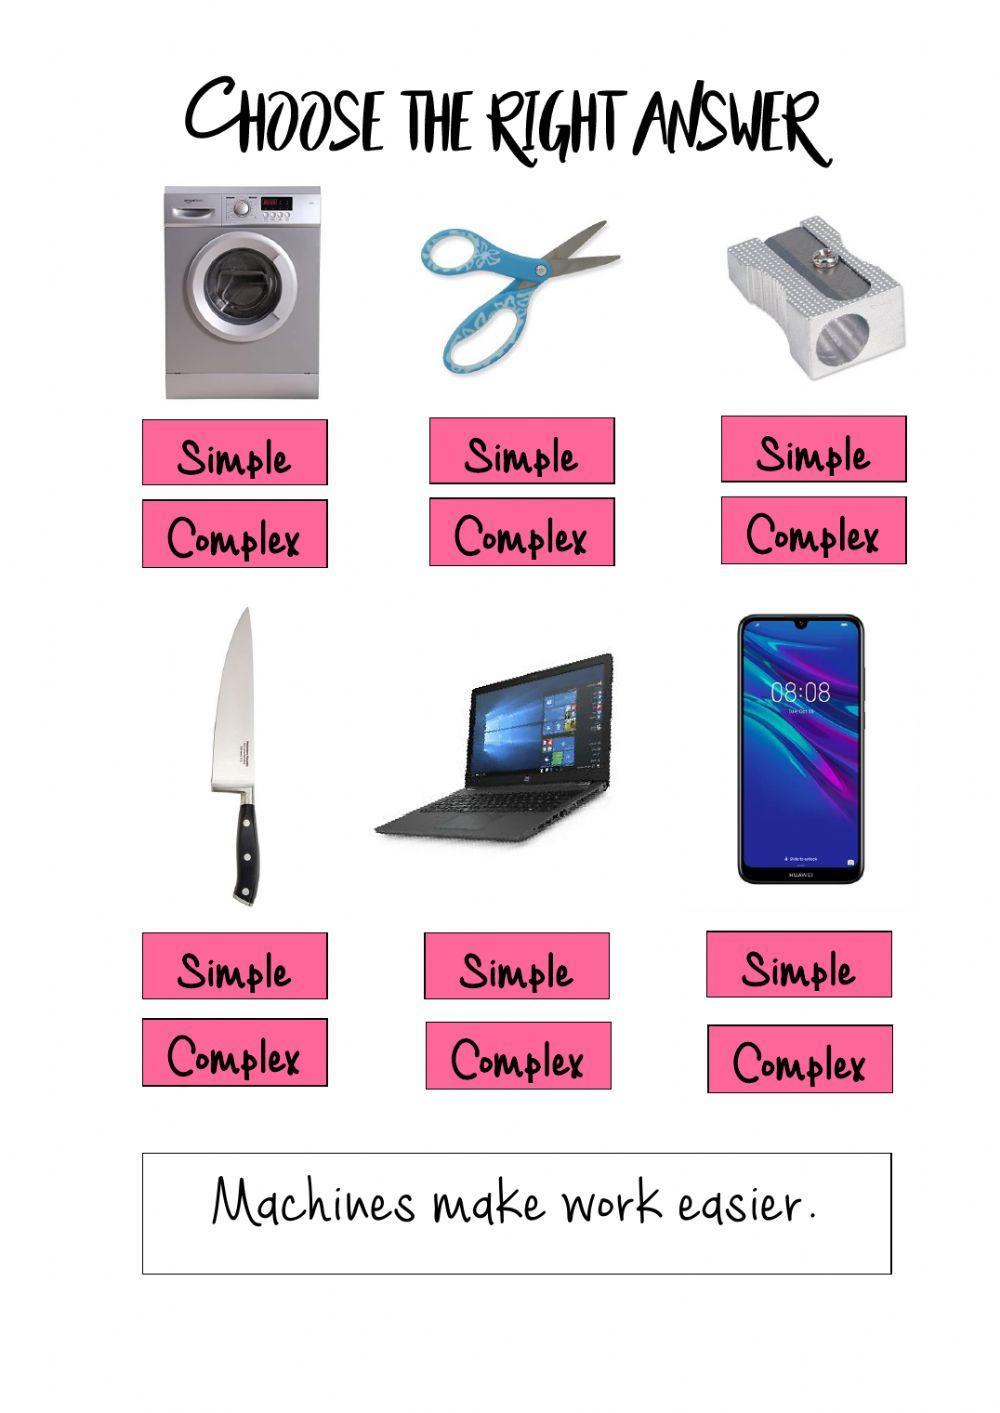 Simple or complex machines